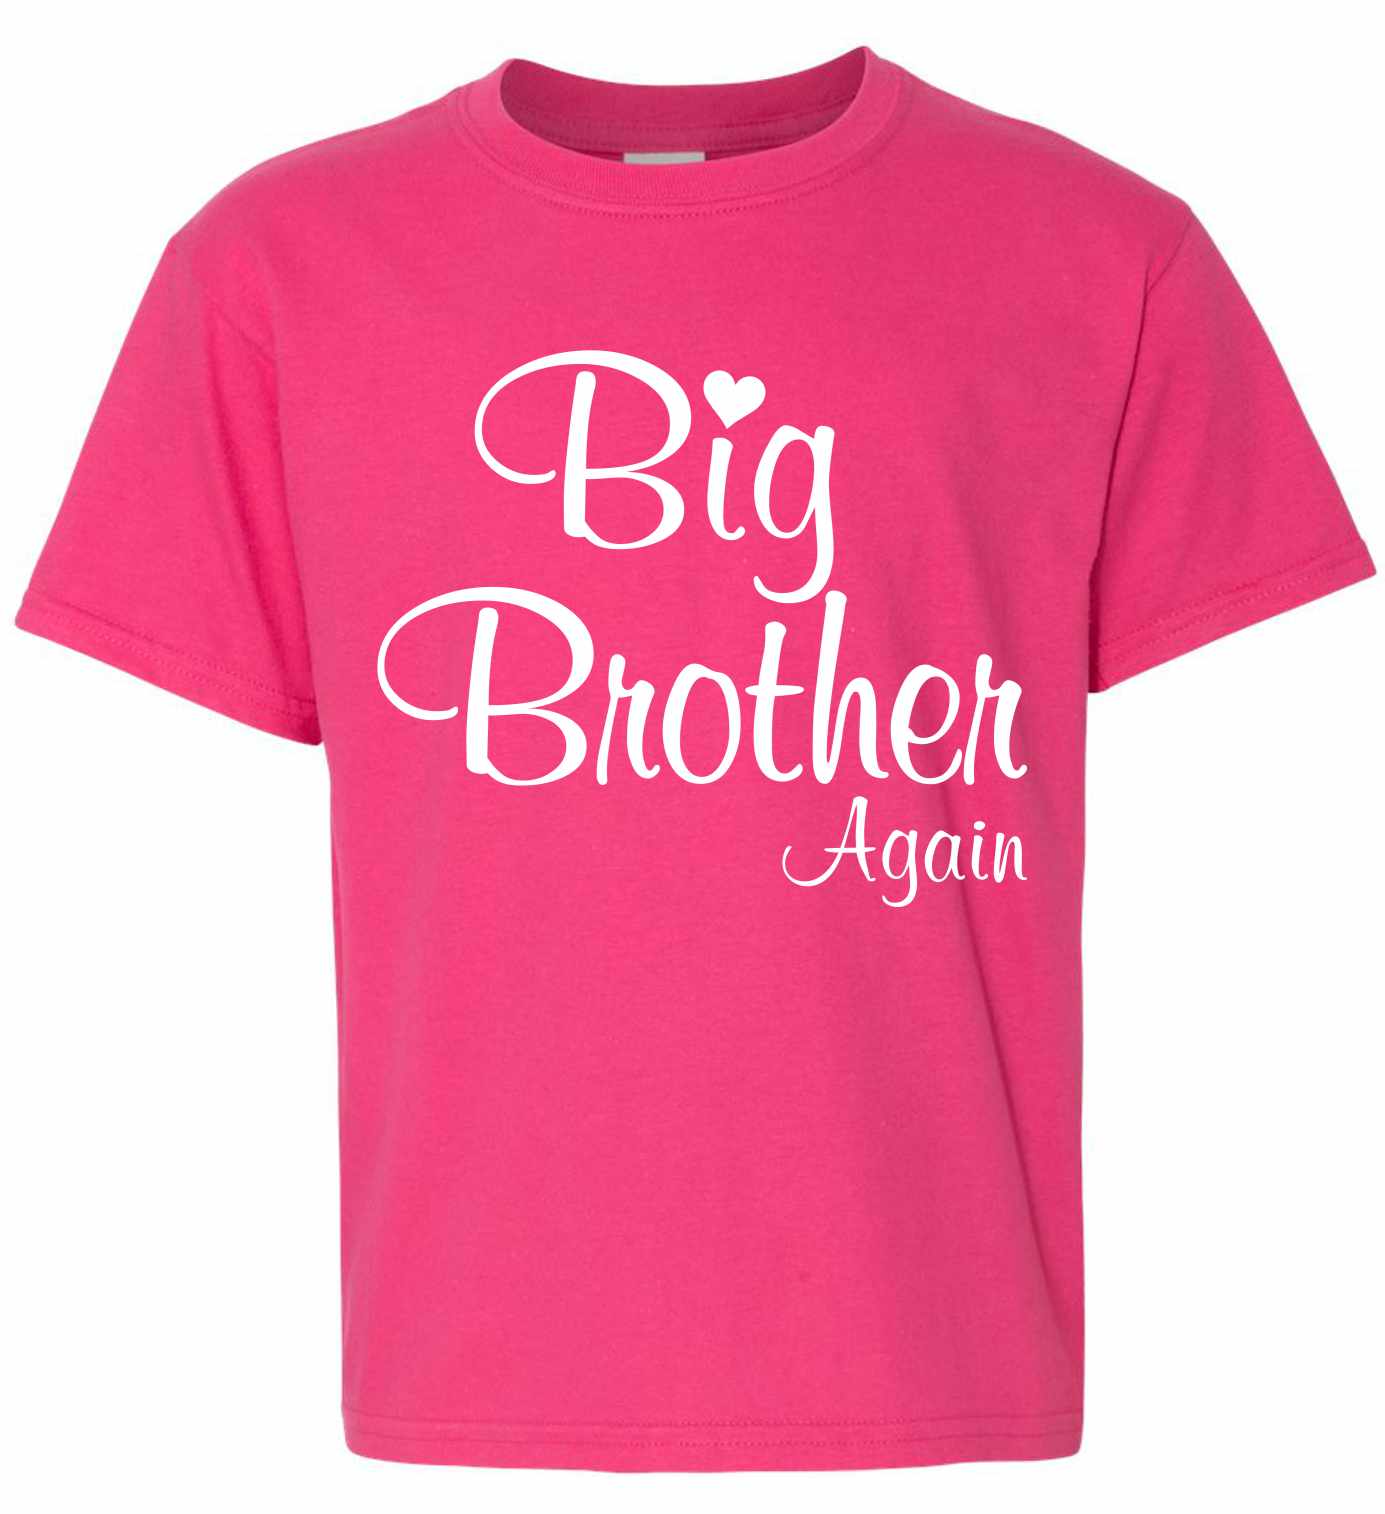 Big Brother Again on Kids T-Shirt (#1337-201)